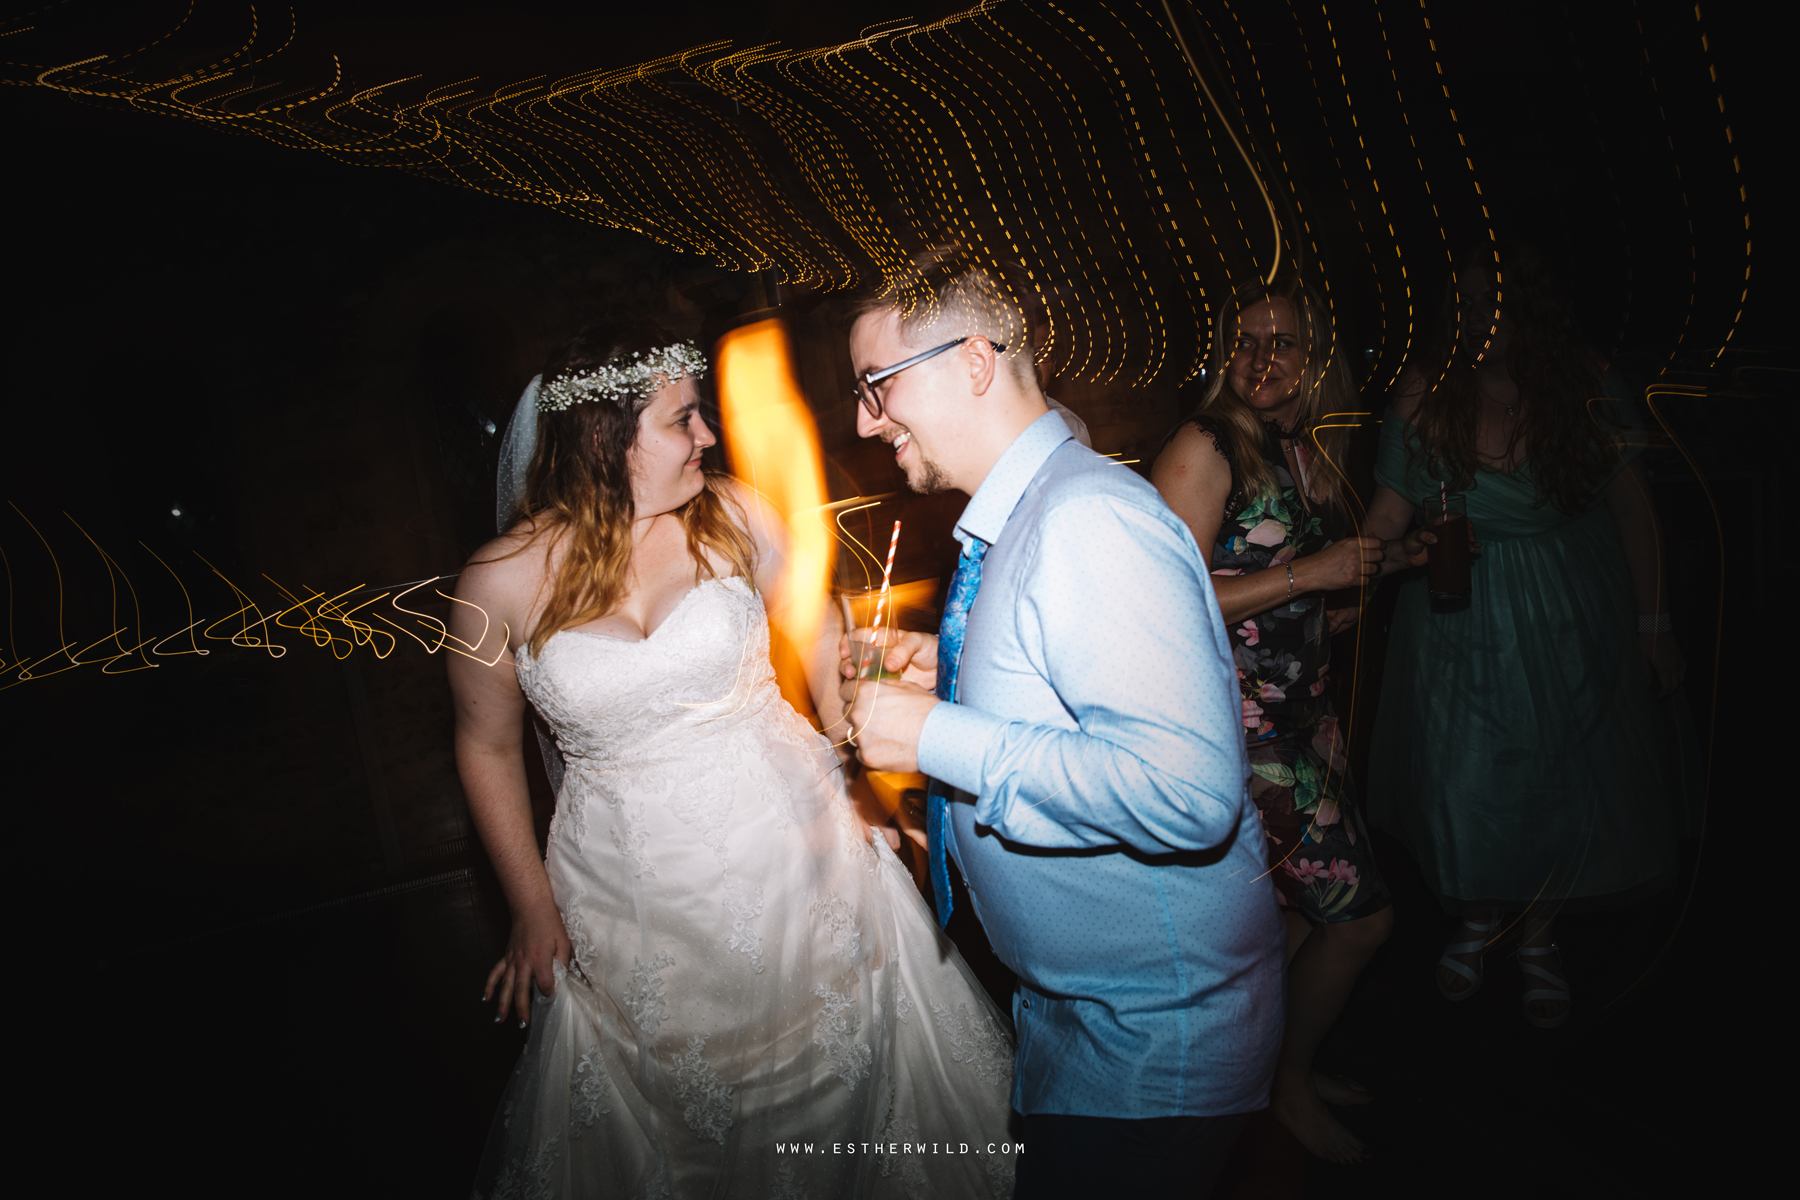 Norwich_Castle_Arcade_Grosvenor_Chip_Birdcage_Cathedral_Cloisters_Refectory_Wedding_Photography_Esther_Wild_Photographer_Norfolk_Kings_Lynn_3R8A3433.jpg